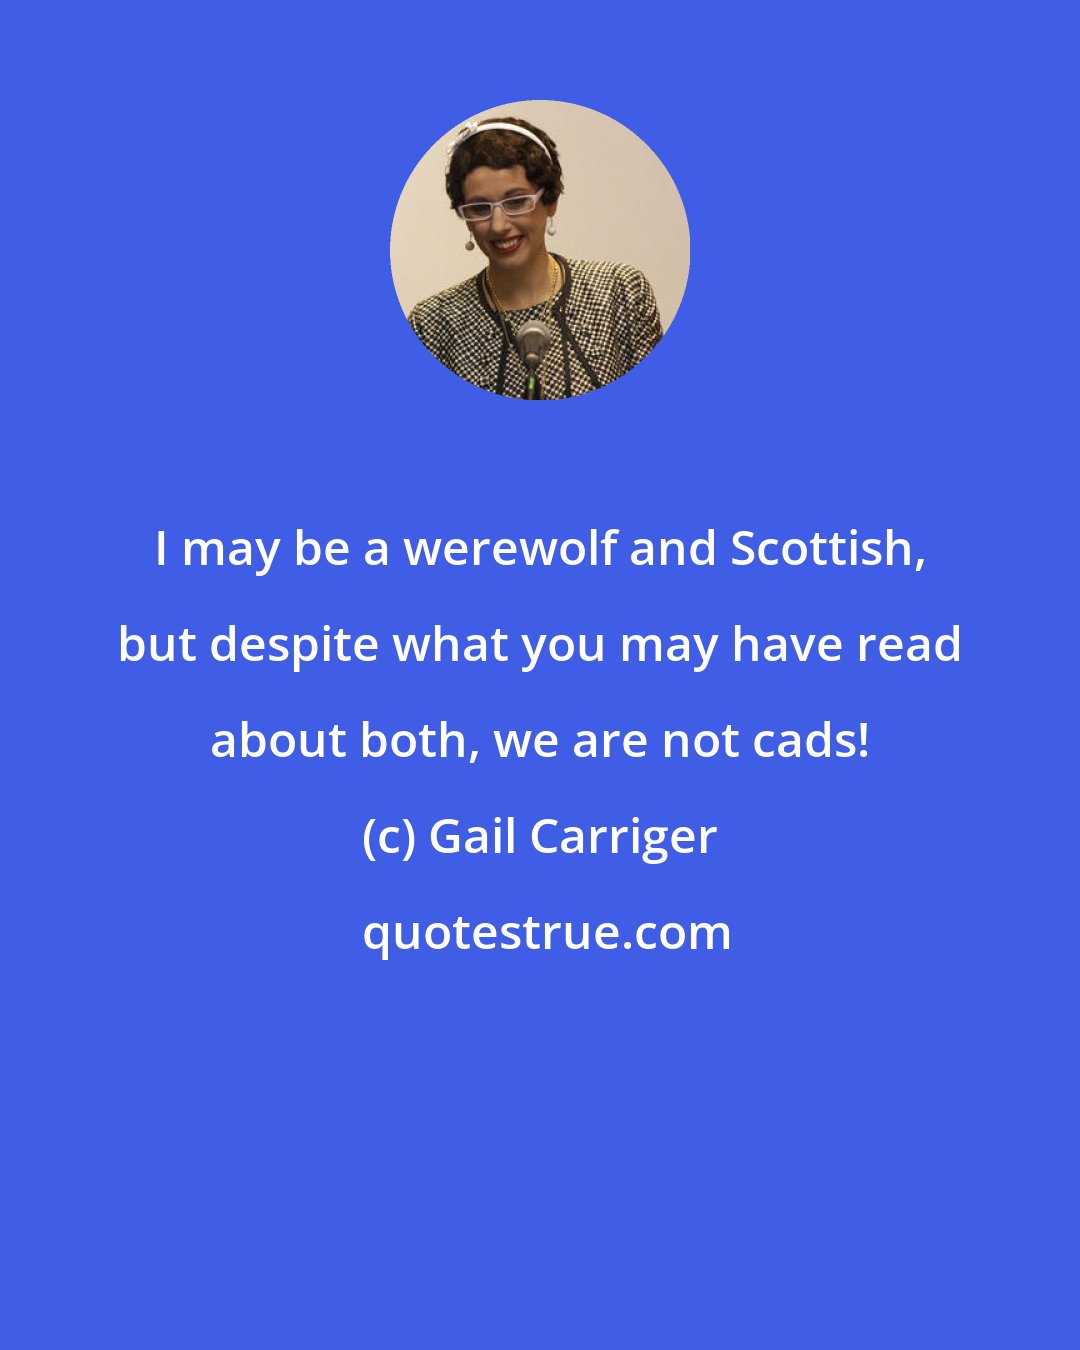 Gail Carriger: I may be a werewolf and Scottish, but despite what you may have read about both, we are not cads!